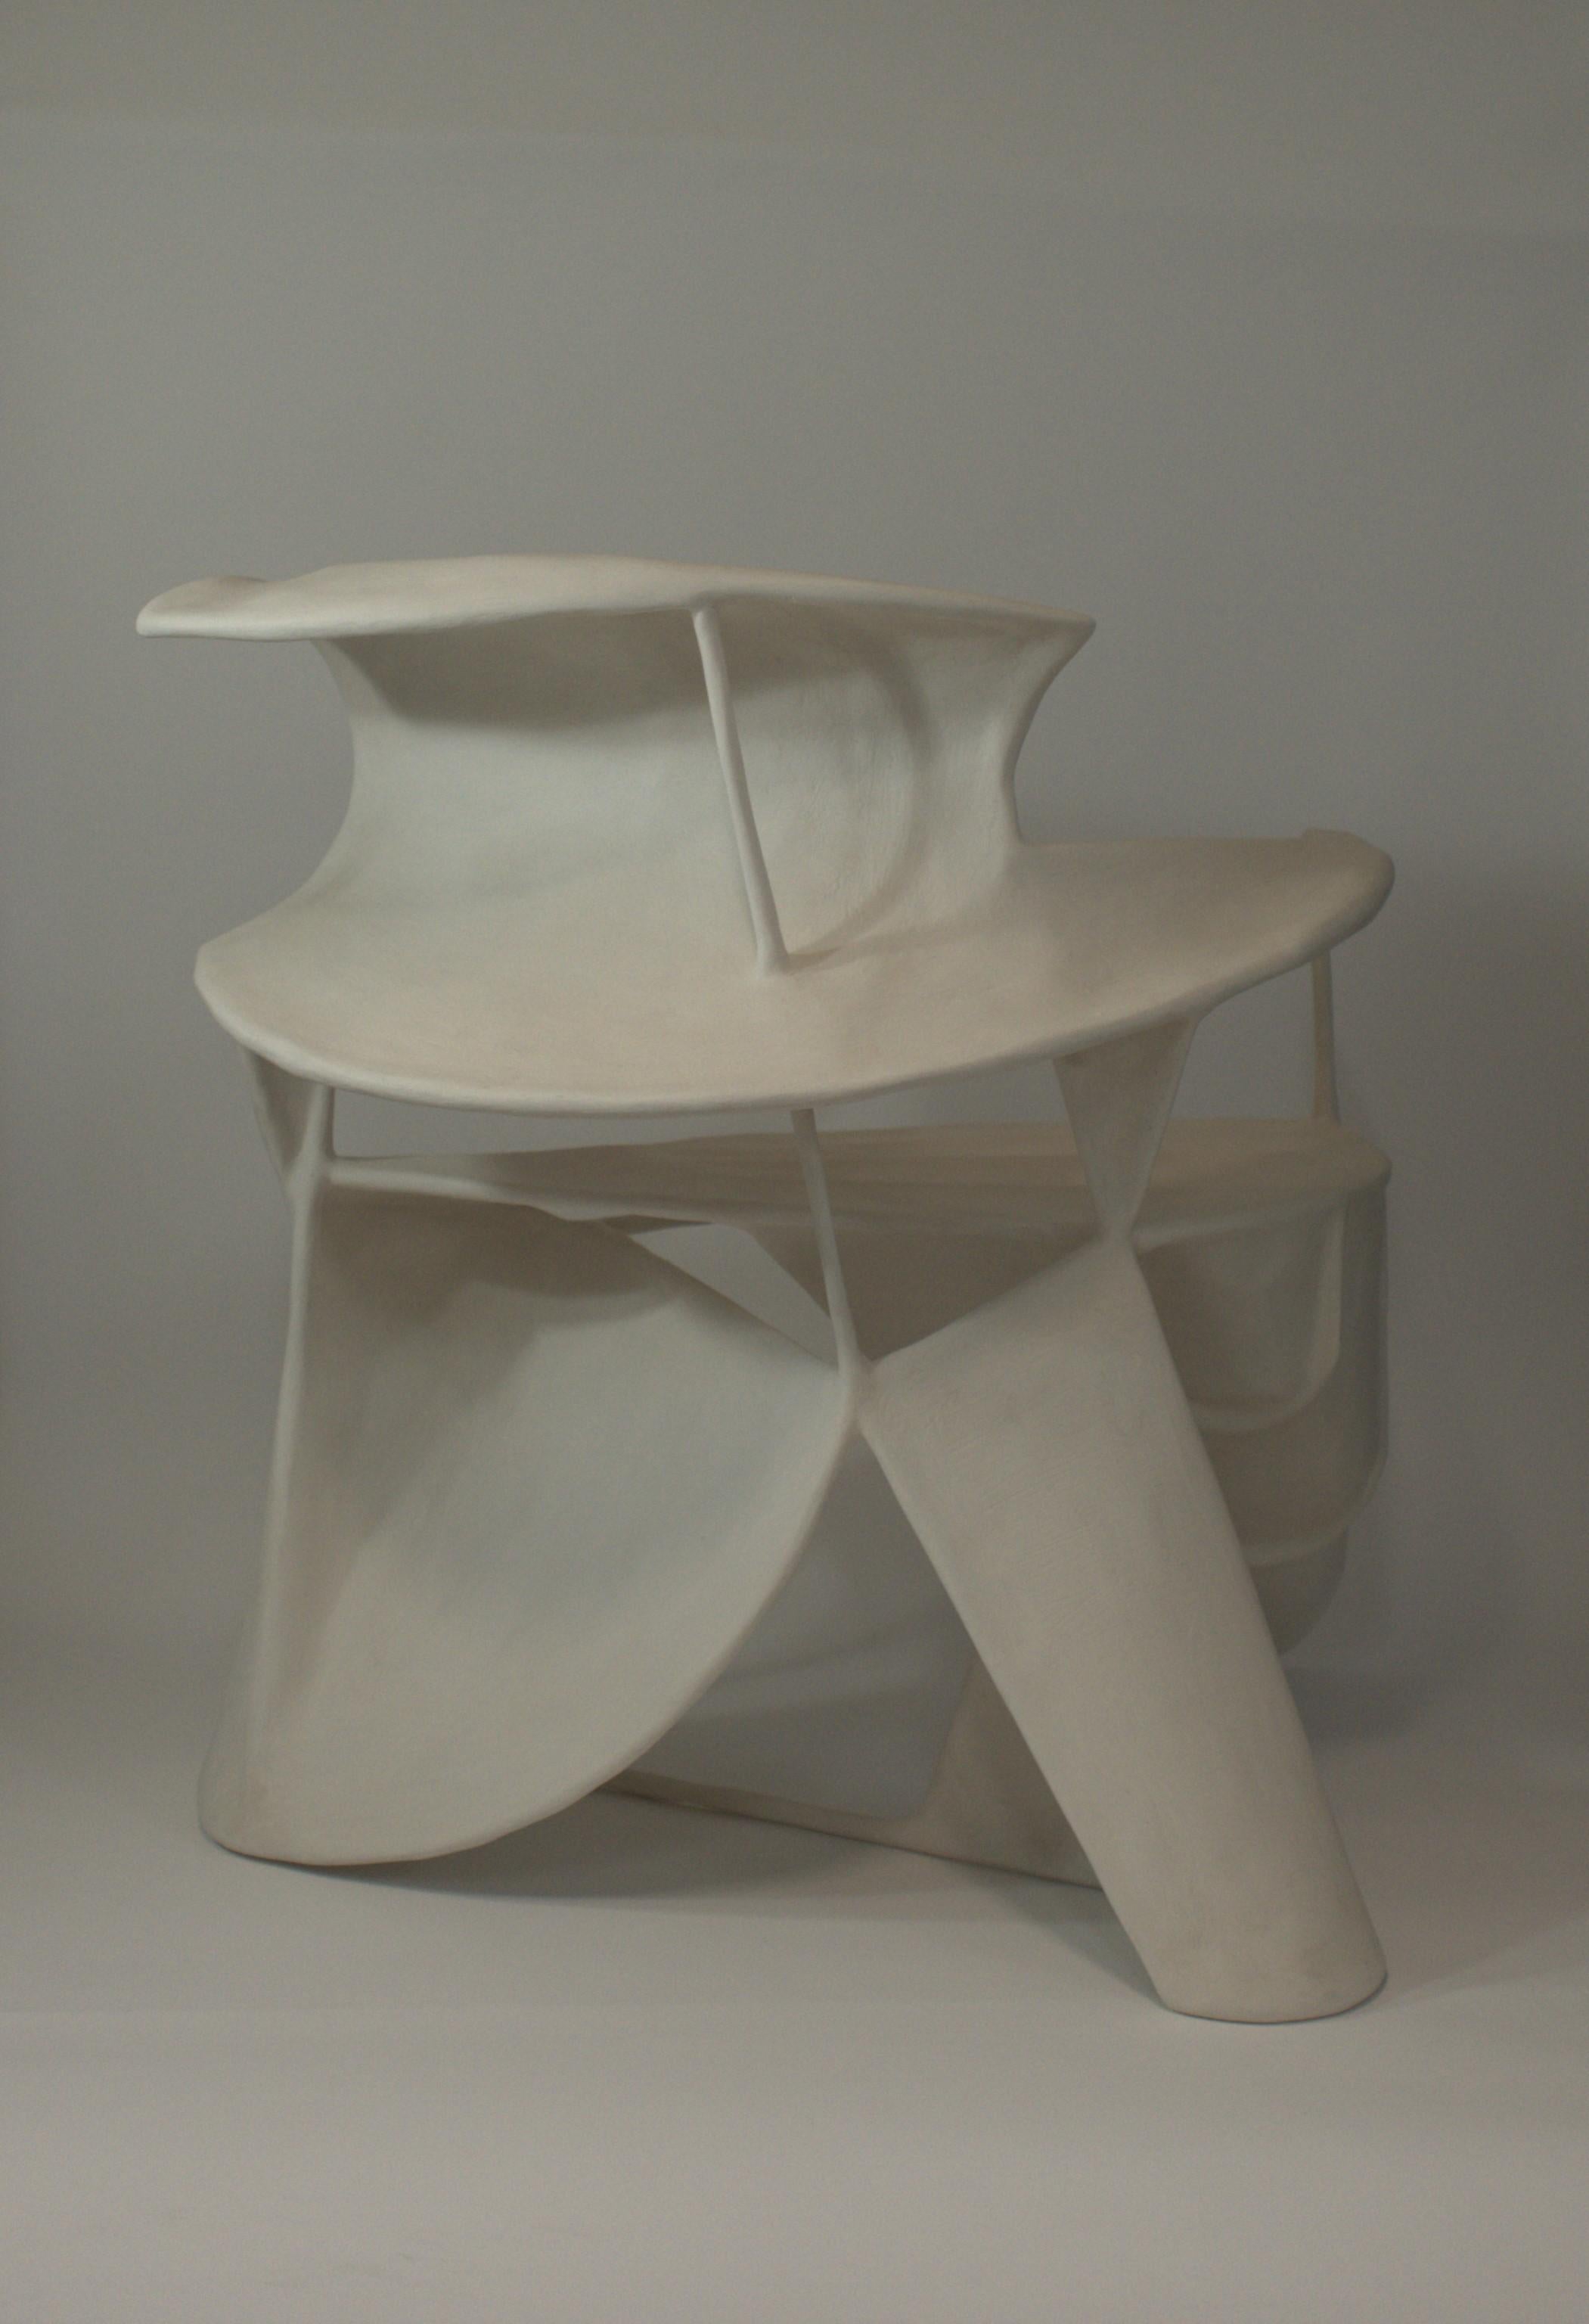 Contemporary Design White Textured Curved Sculptures Chair by Jordan van der Ven In New Condition For Sale In Amsterdam, NL